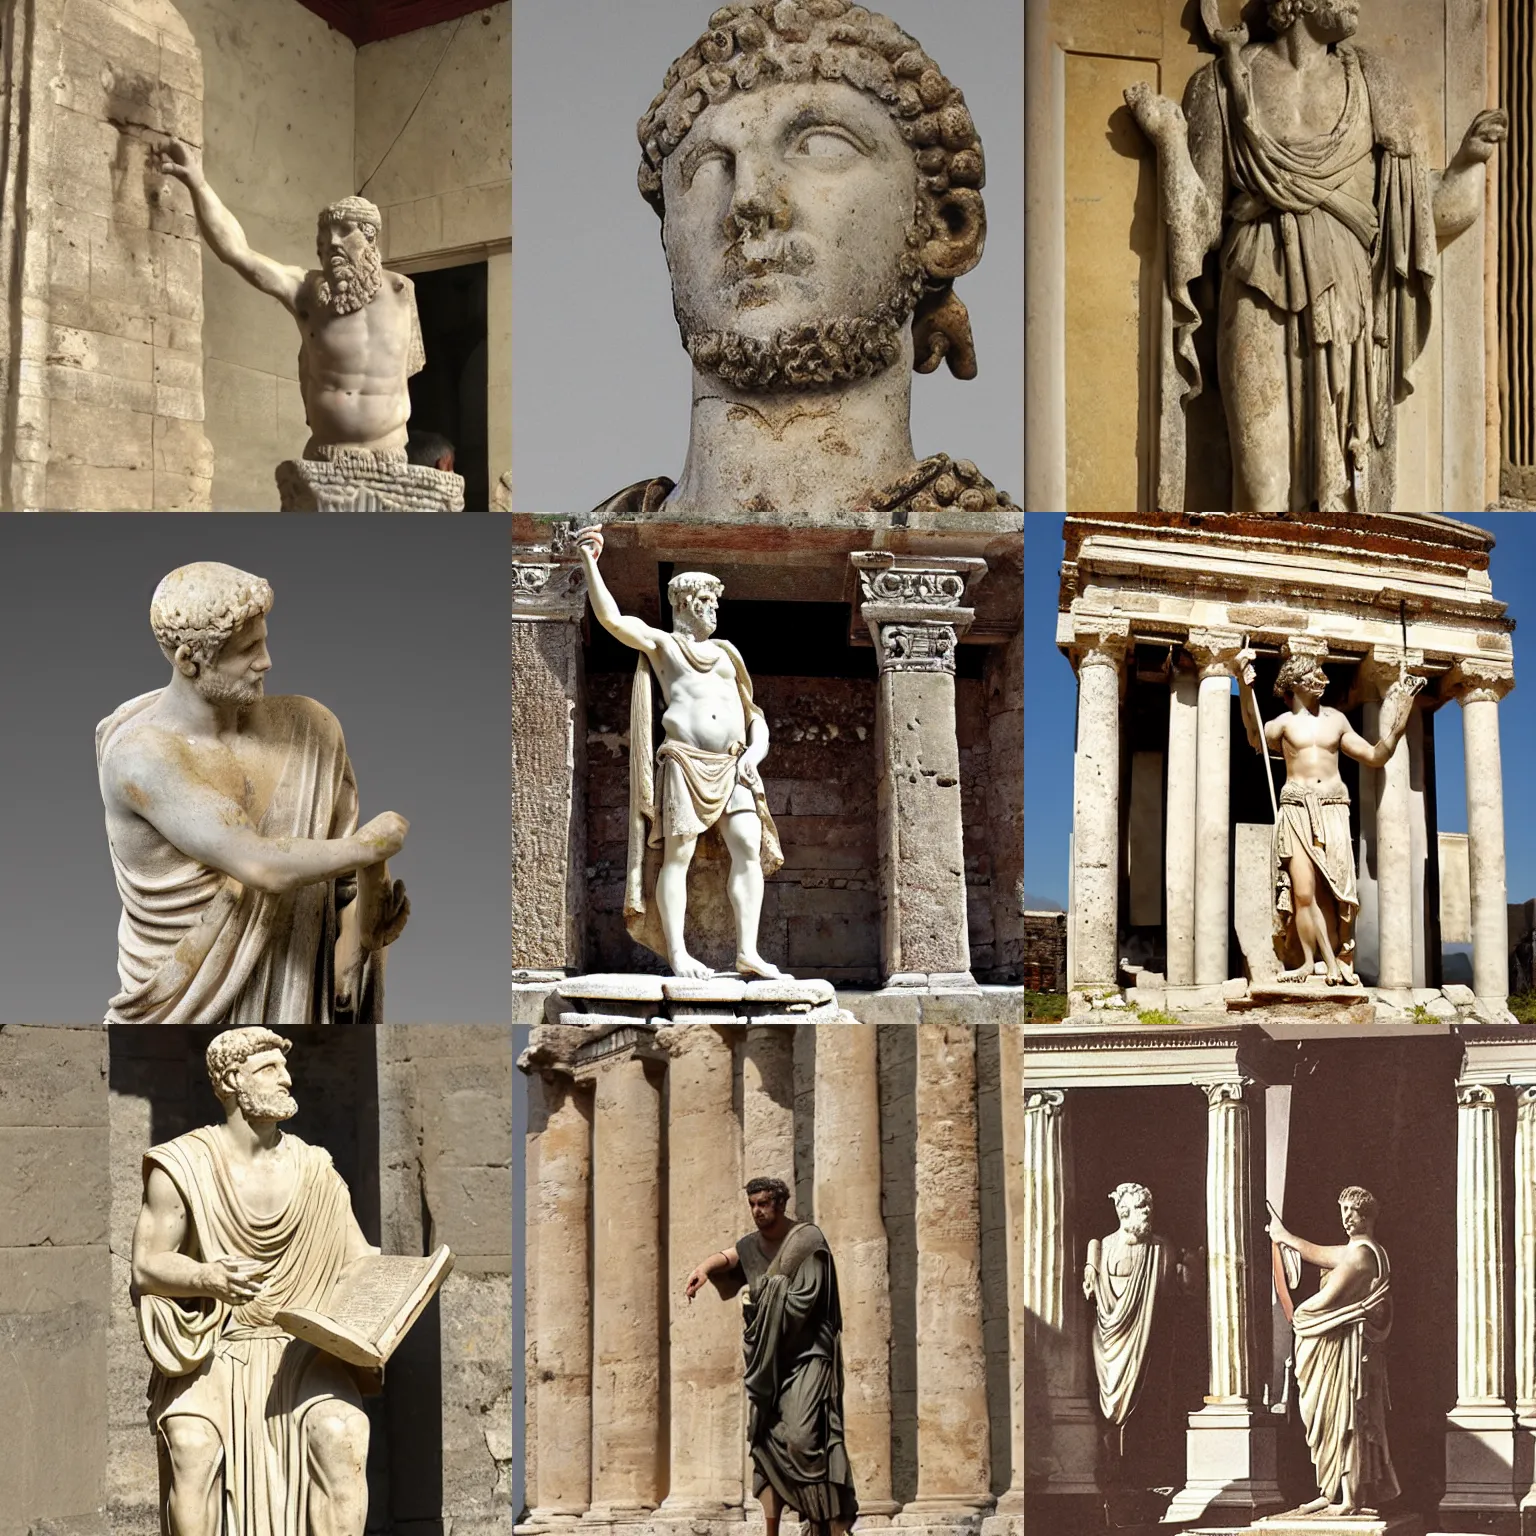 Prompt: An ancient Roman orator